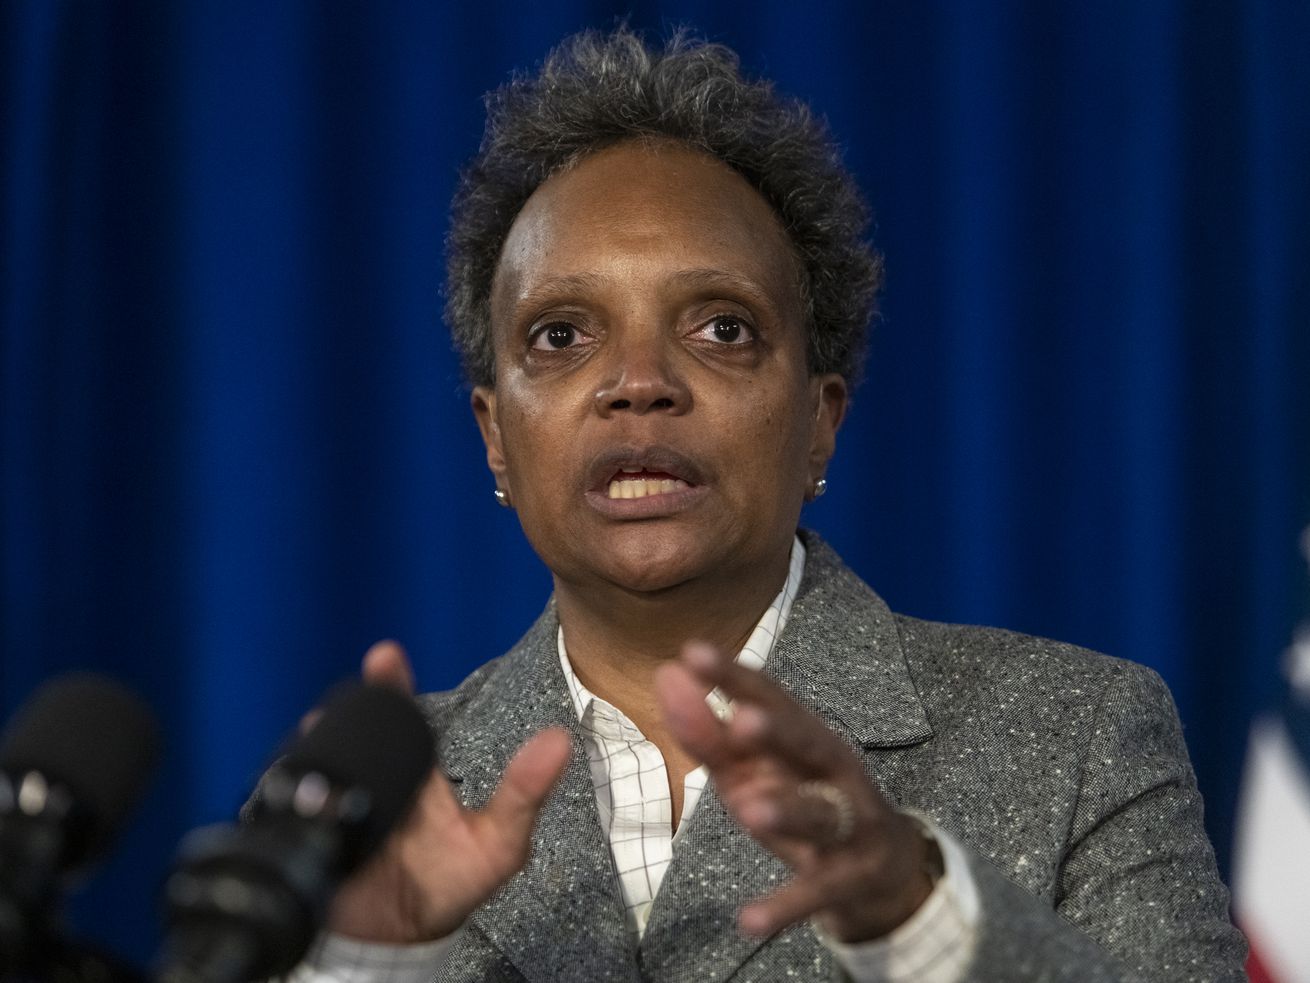 Mayor Lori Lightfoot speaks to reporters during a press conference at City Hall, updating reporters on the current situation with the Chicago Teachers Union on Jan. 4.